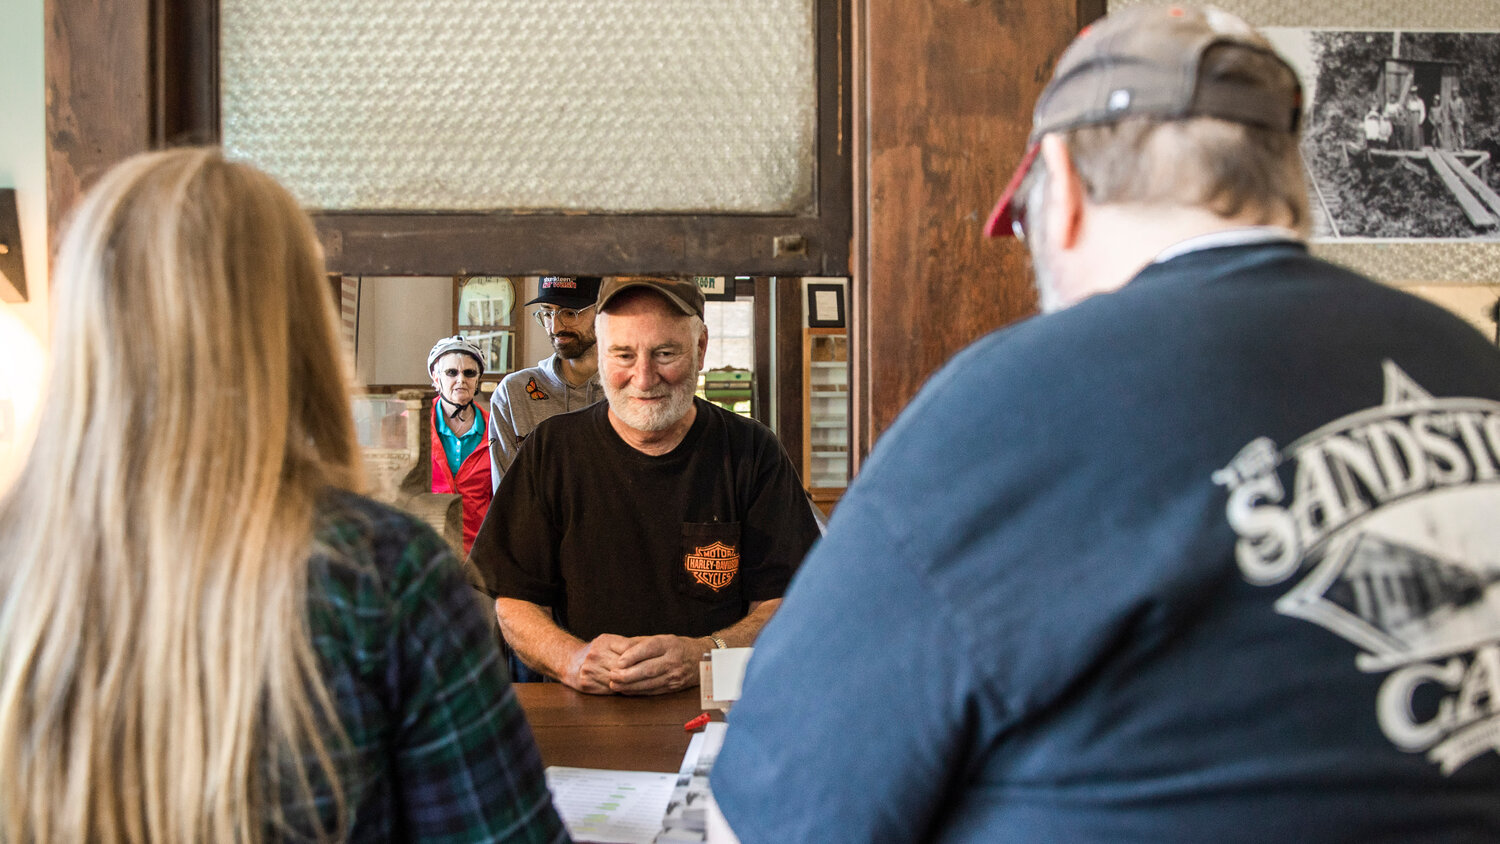 A line forms in the Tenino Depot Museum on Friday morning as co-authors Jessica Reeves-Rush and Rich Edwards sell their new book detailing 150 years of history in Tenino.